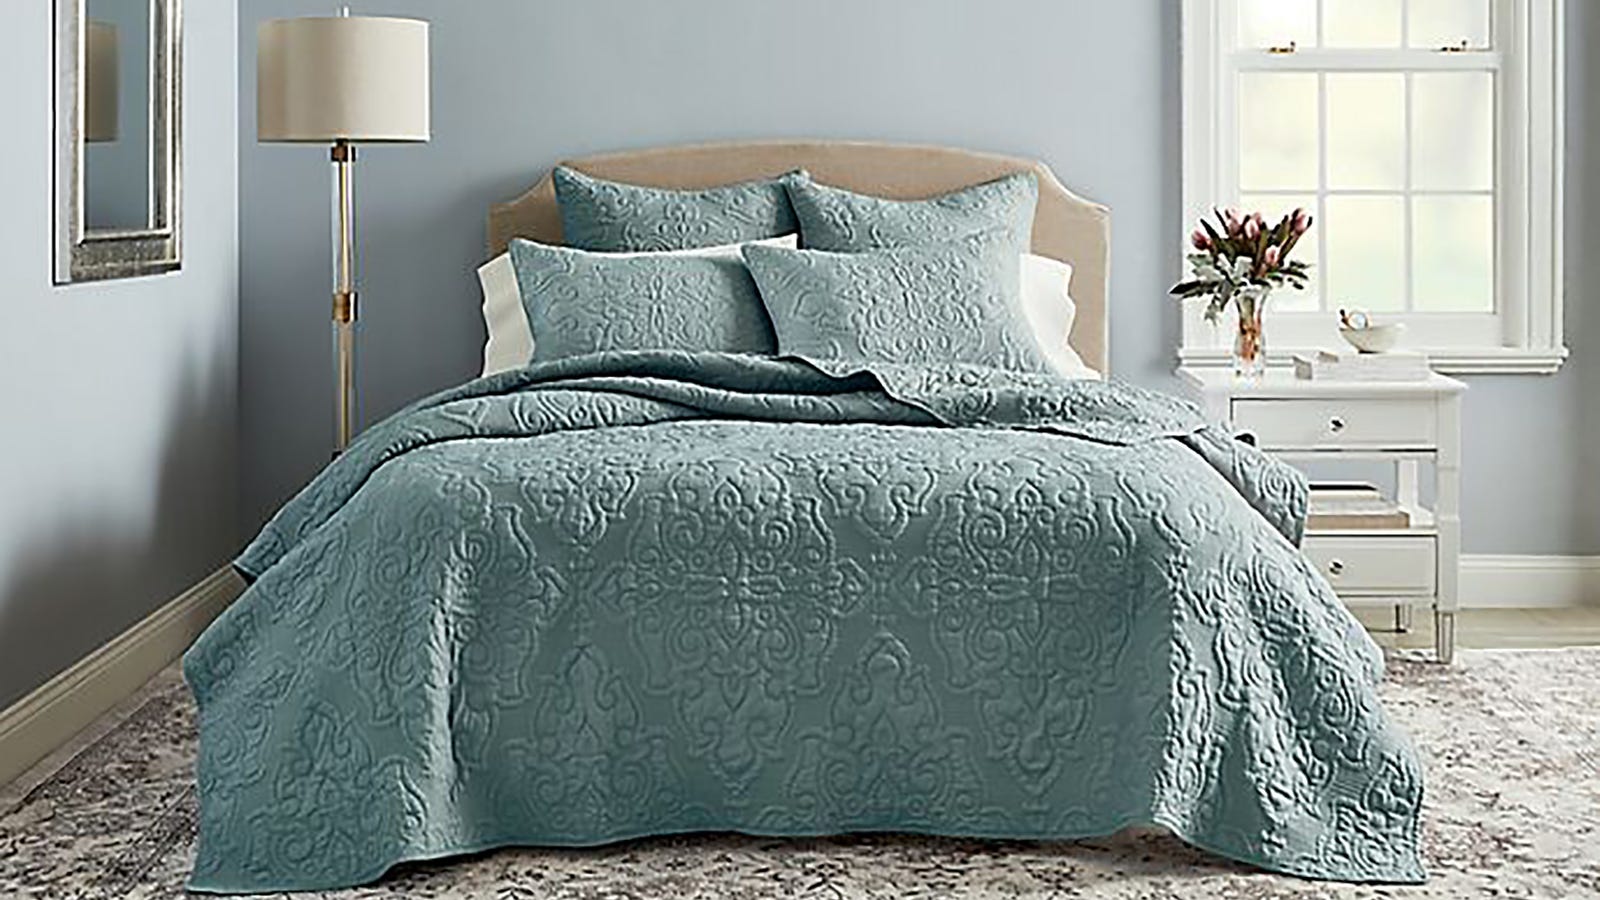 Bed Bath Beyond Get A Comforter For, Duvet Covers King Bed Bath And Beyond